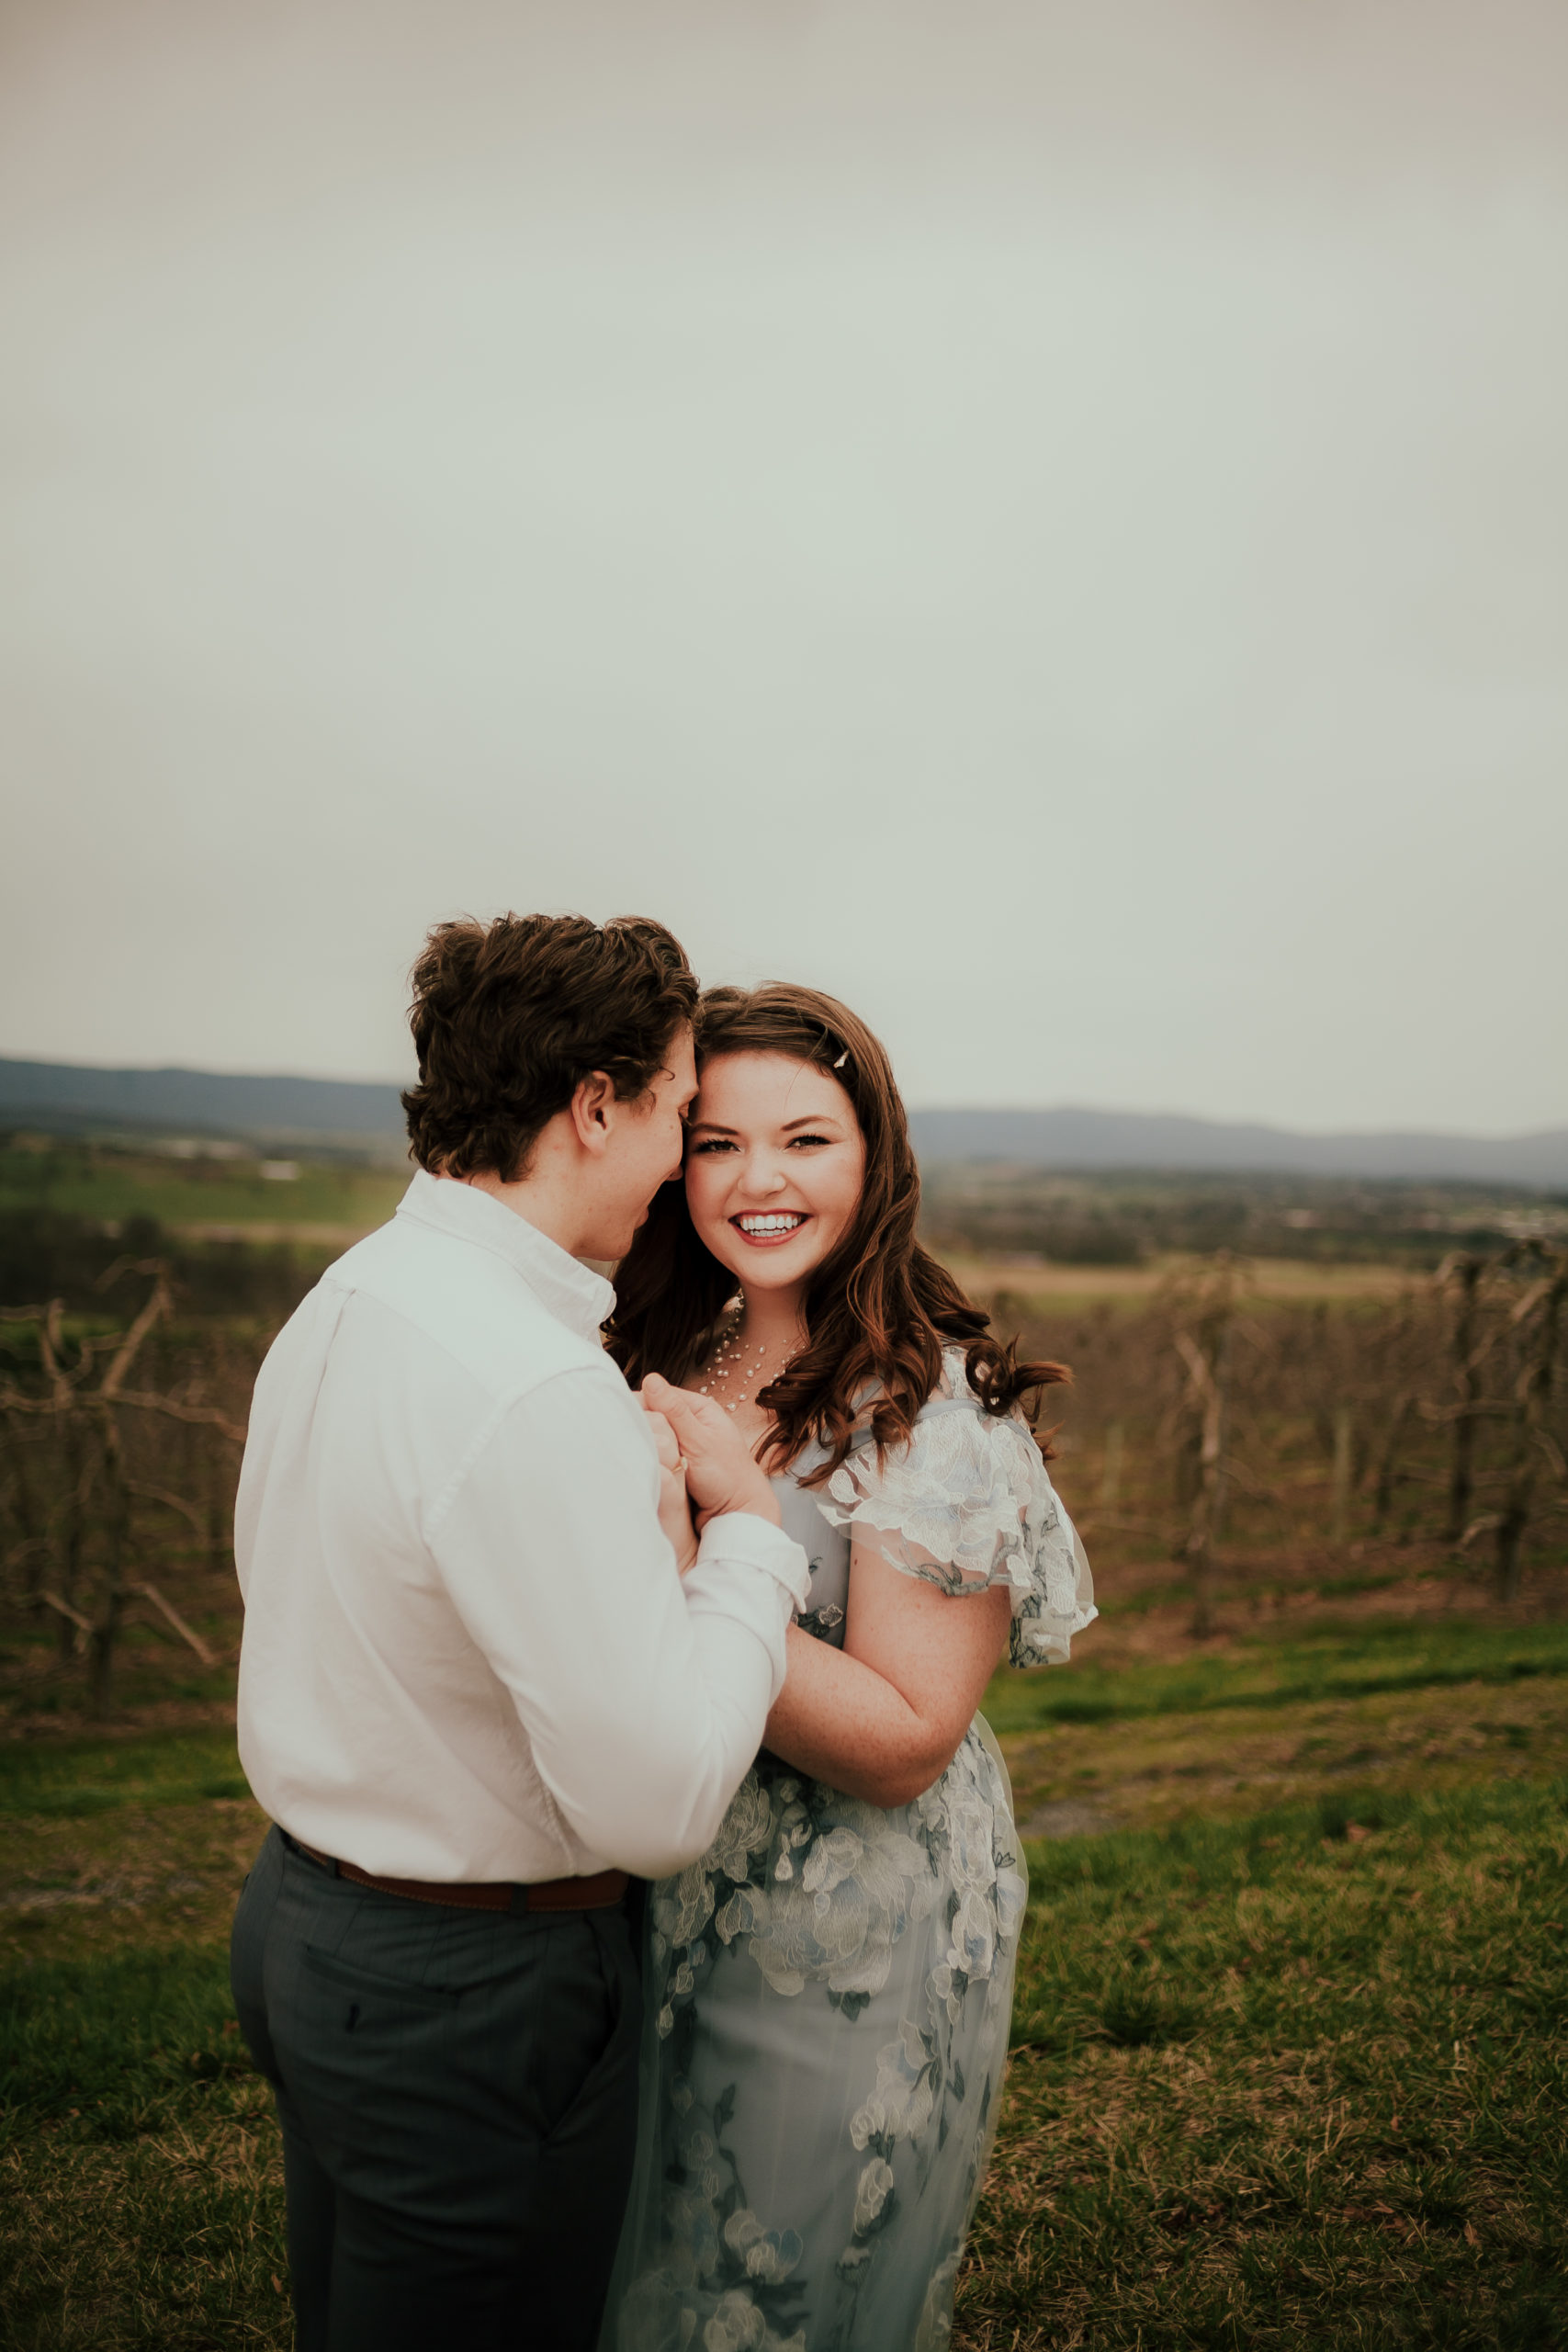 Peaks+Waves Portraits | Elopement | Engagement | Showalters Orchard & Greenhouse | Timberville, Virginia | Virginia Photographer